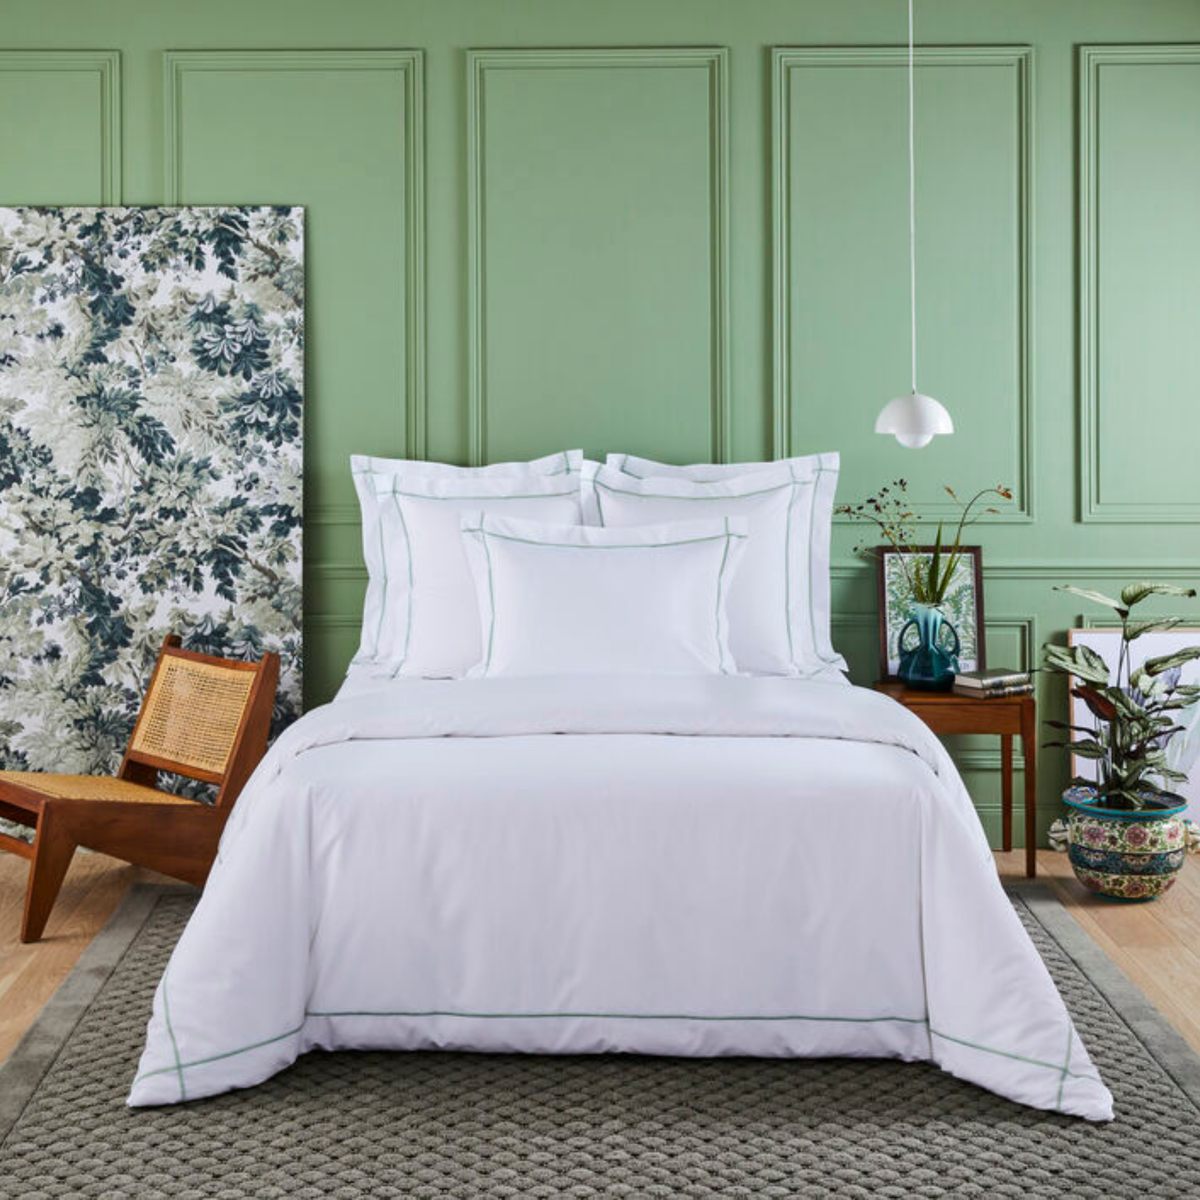 Full Bed Dressed in Yves Delorme Athena Bedding in Veronese Color